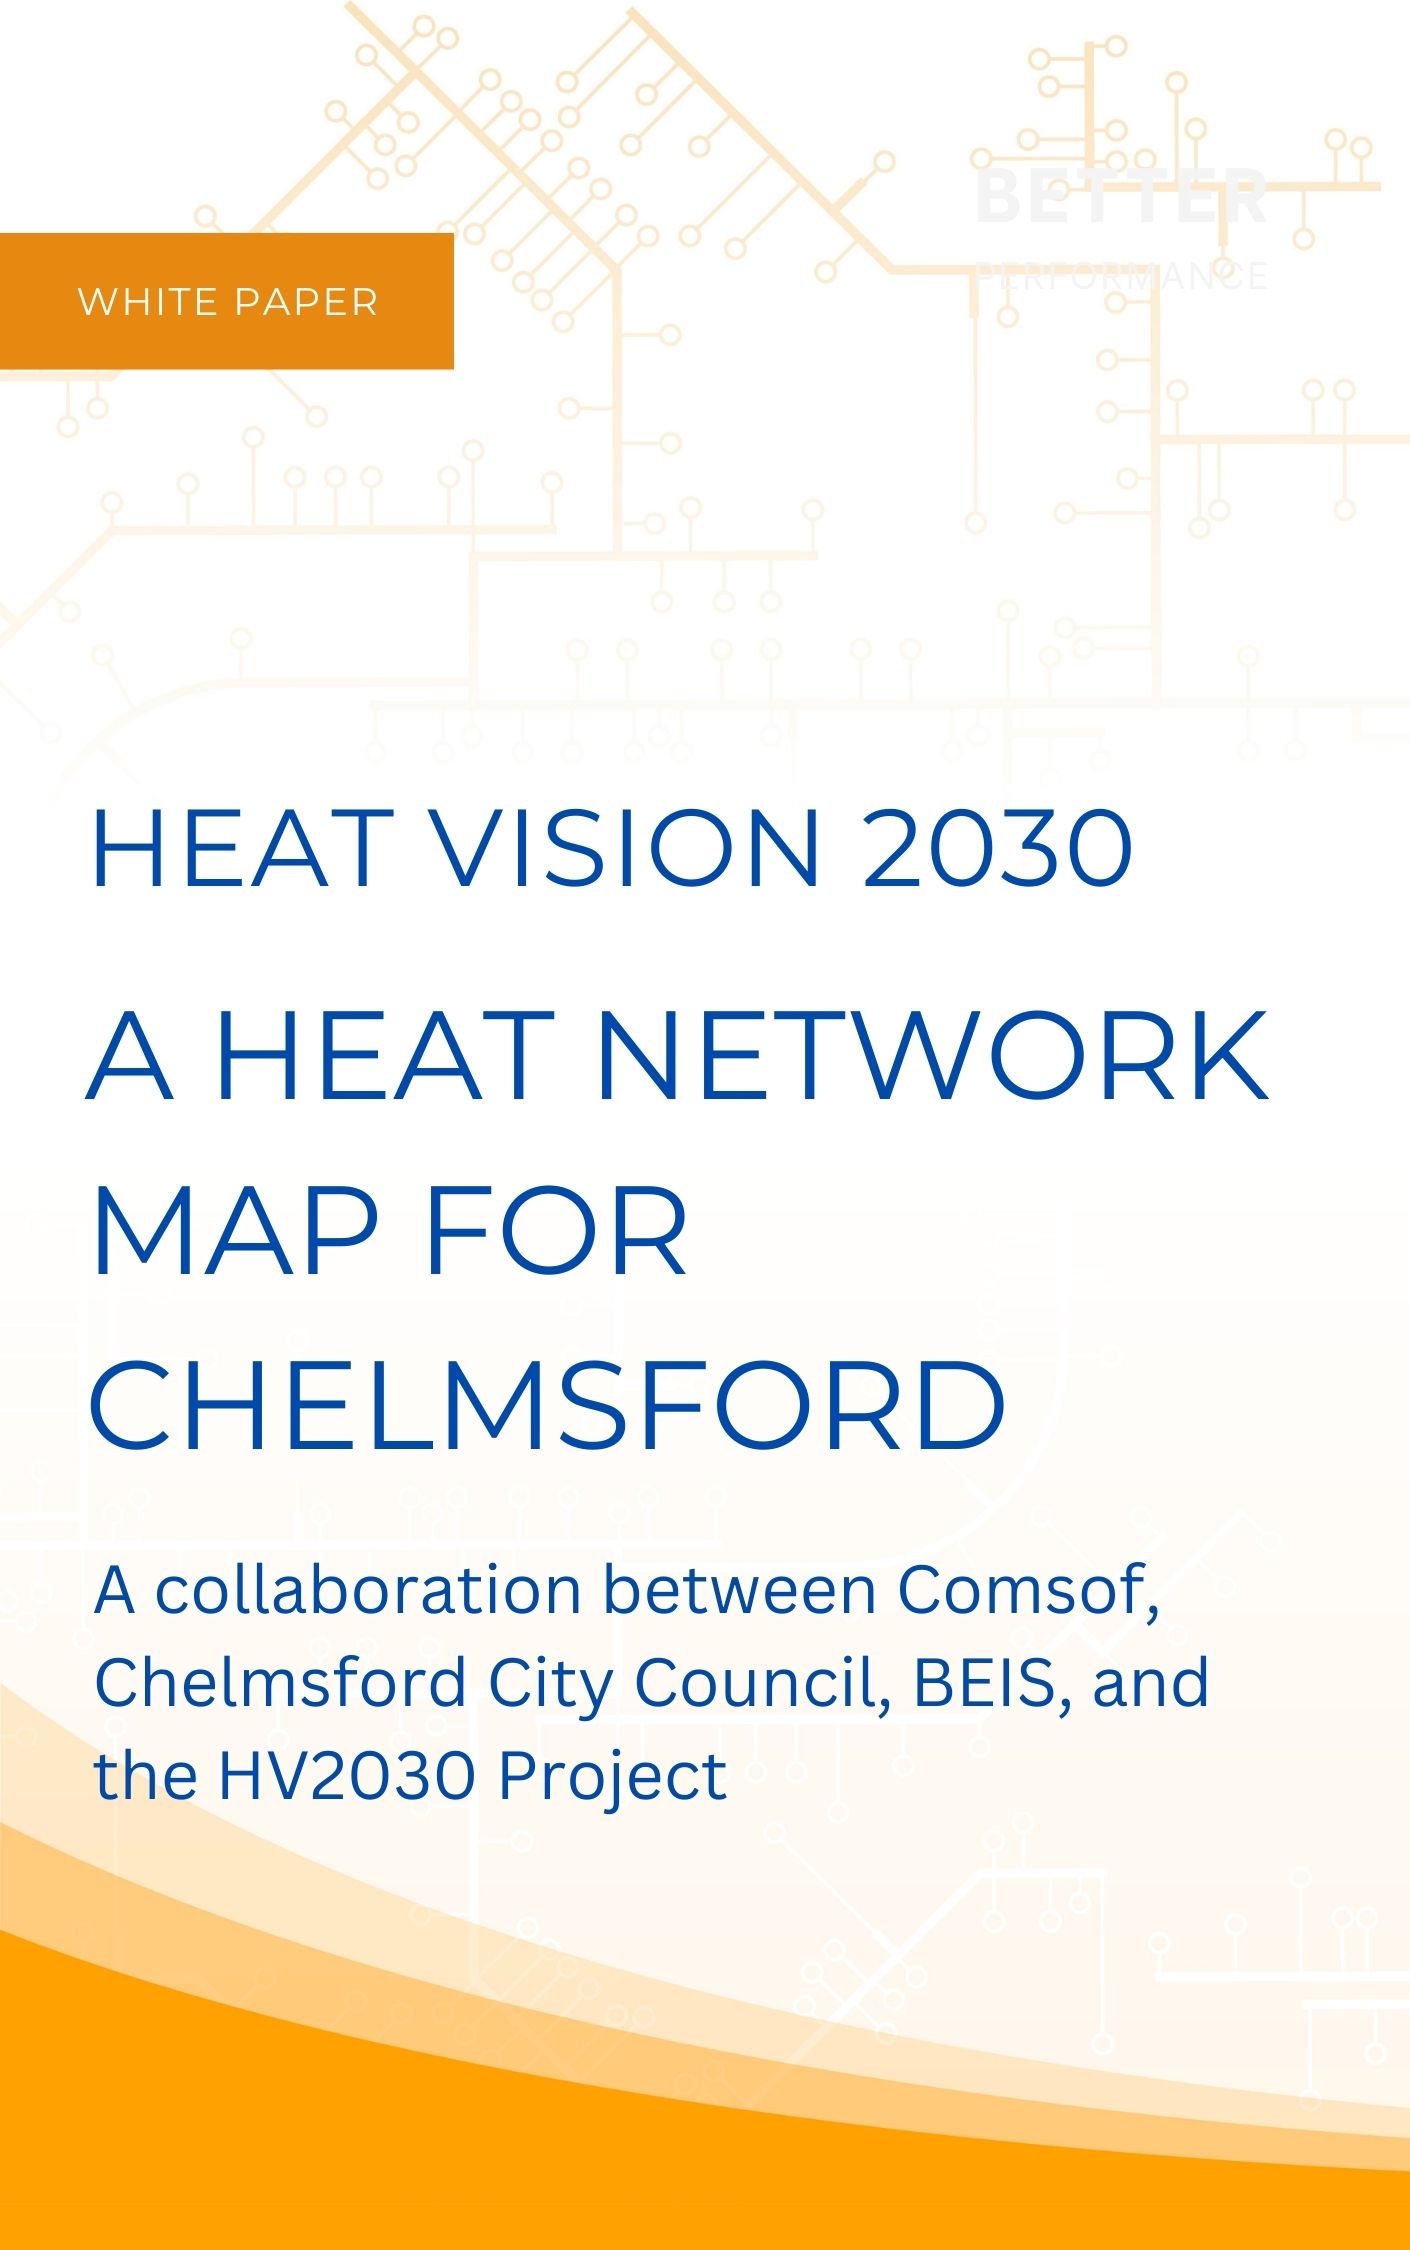 Heat Vision 2030 a heat network map for chelmsford white paper